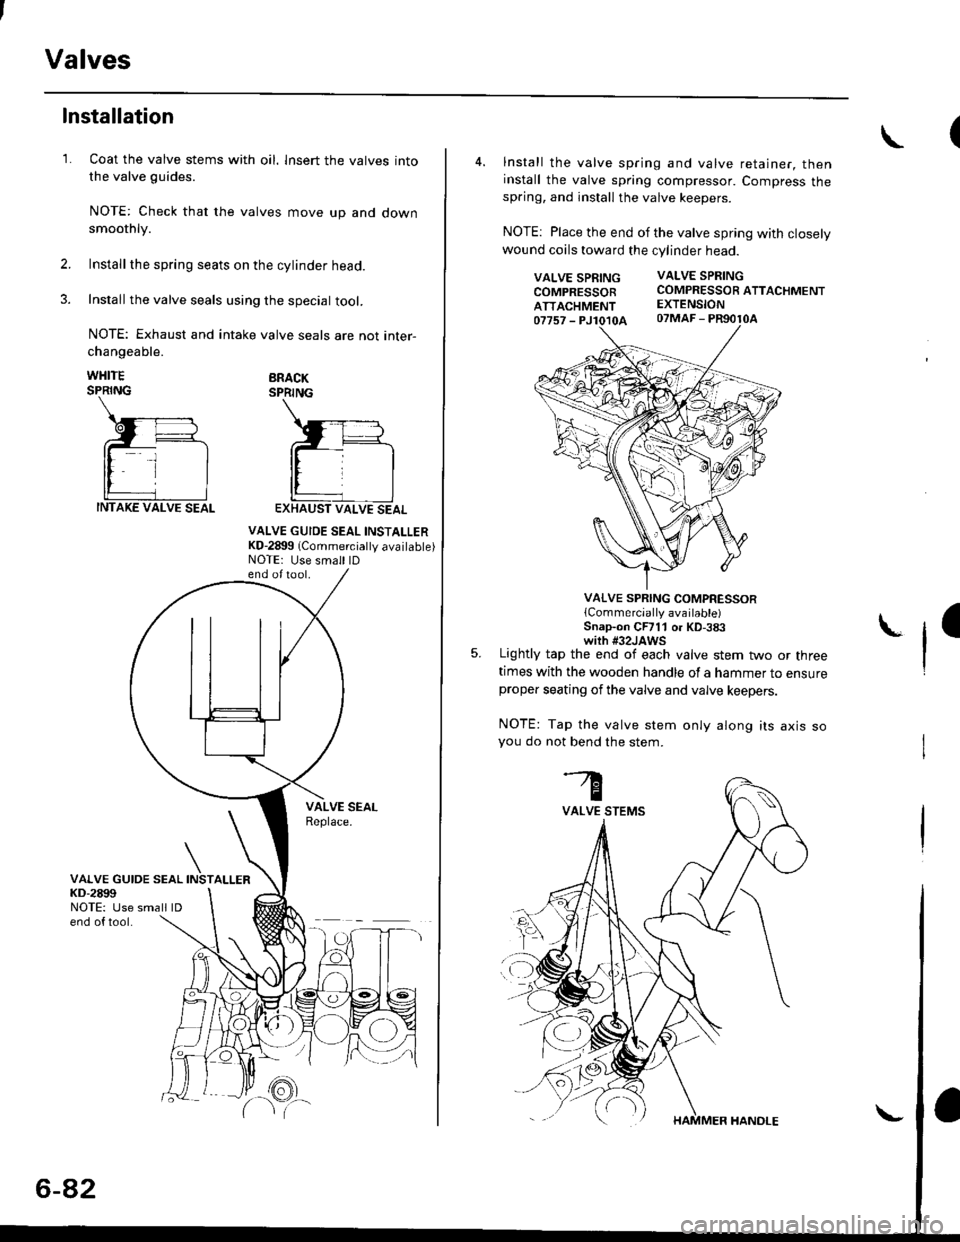 HONDA CIVIC 2000 6.G User Guide Valves
1.
Installation
Coat the valve stems with oil. lnsert the valves into
the valve guides.
NOTE: Check that the valves move up and downsmoothly.
Installthe spring seats on the cylinder head.
Insta